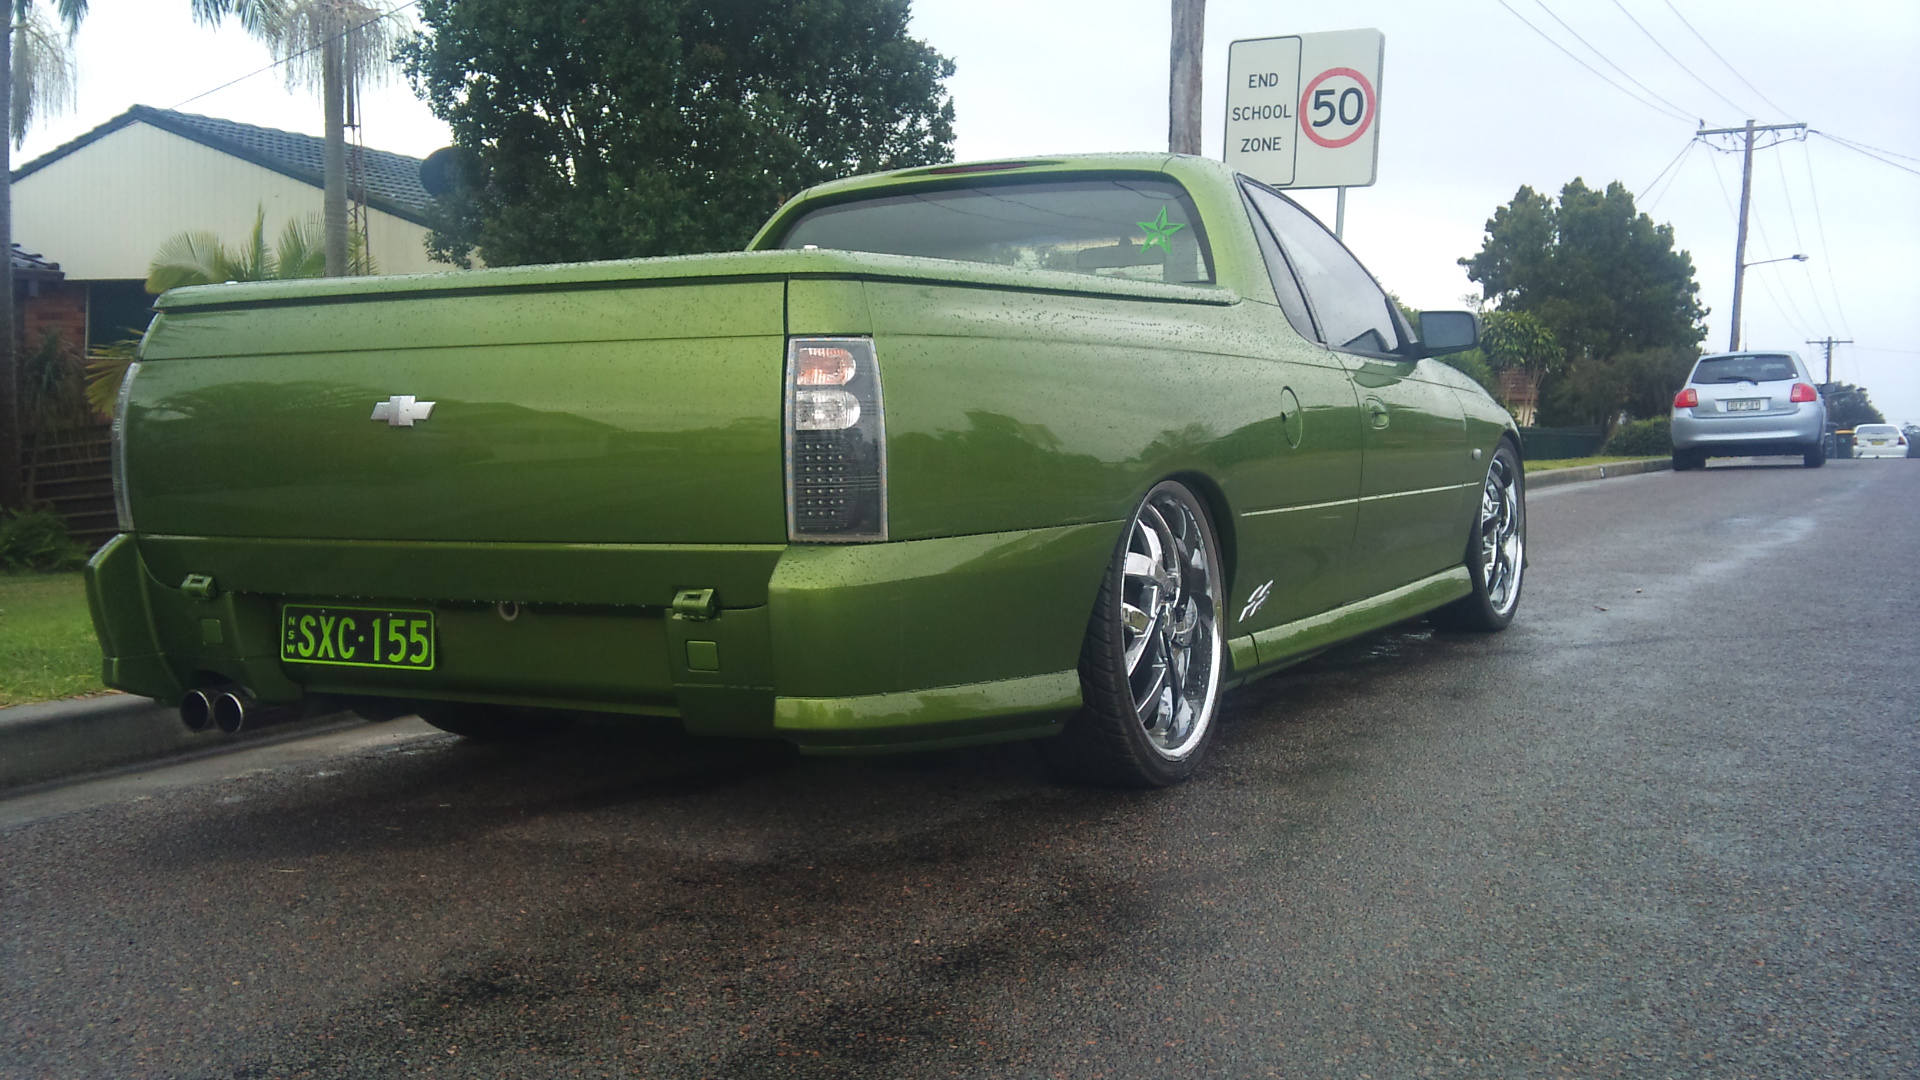 ss ute manual for sale